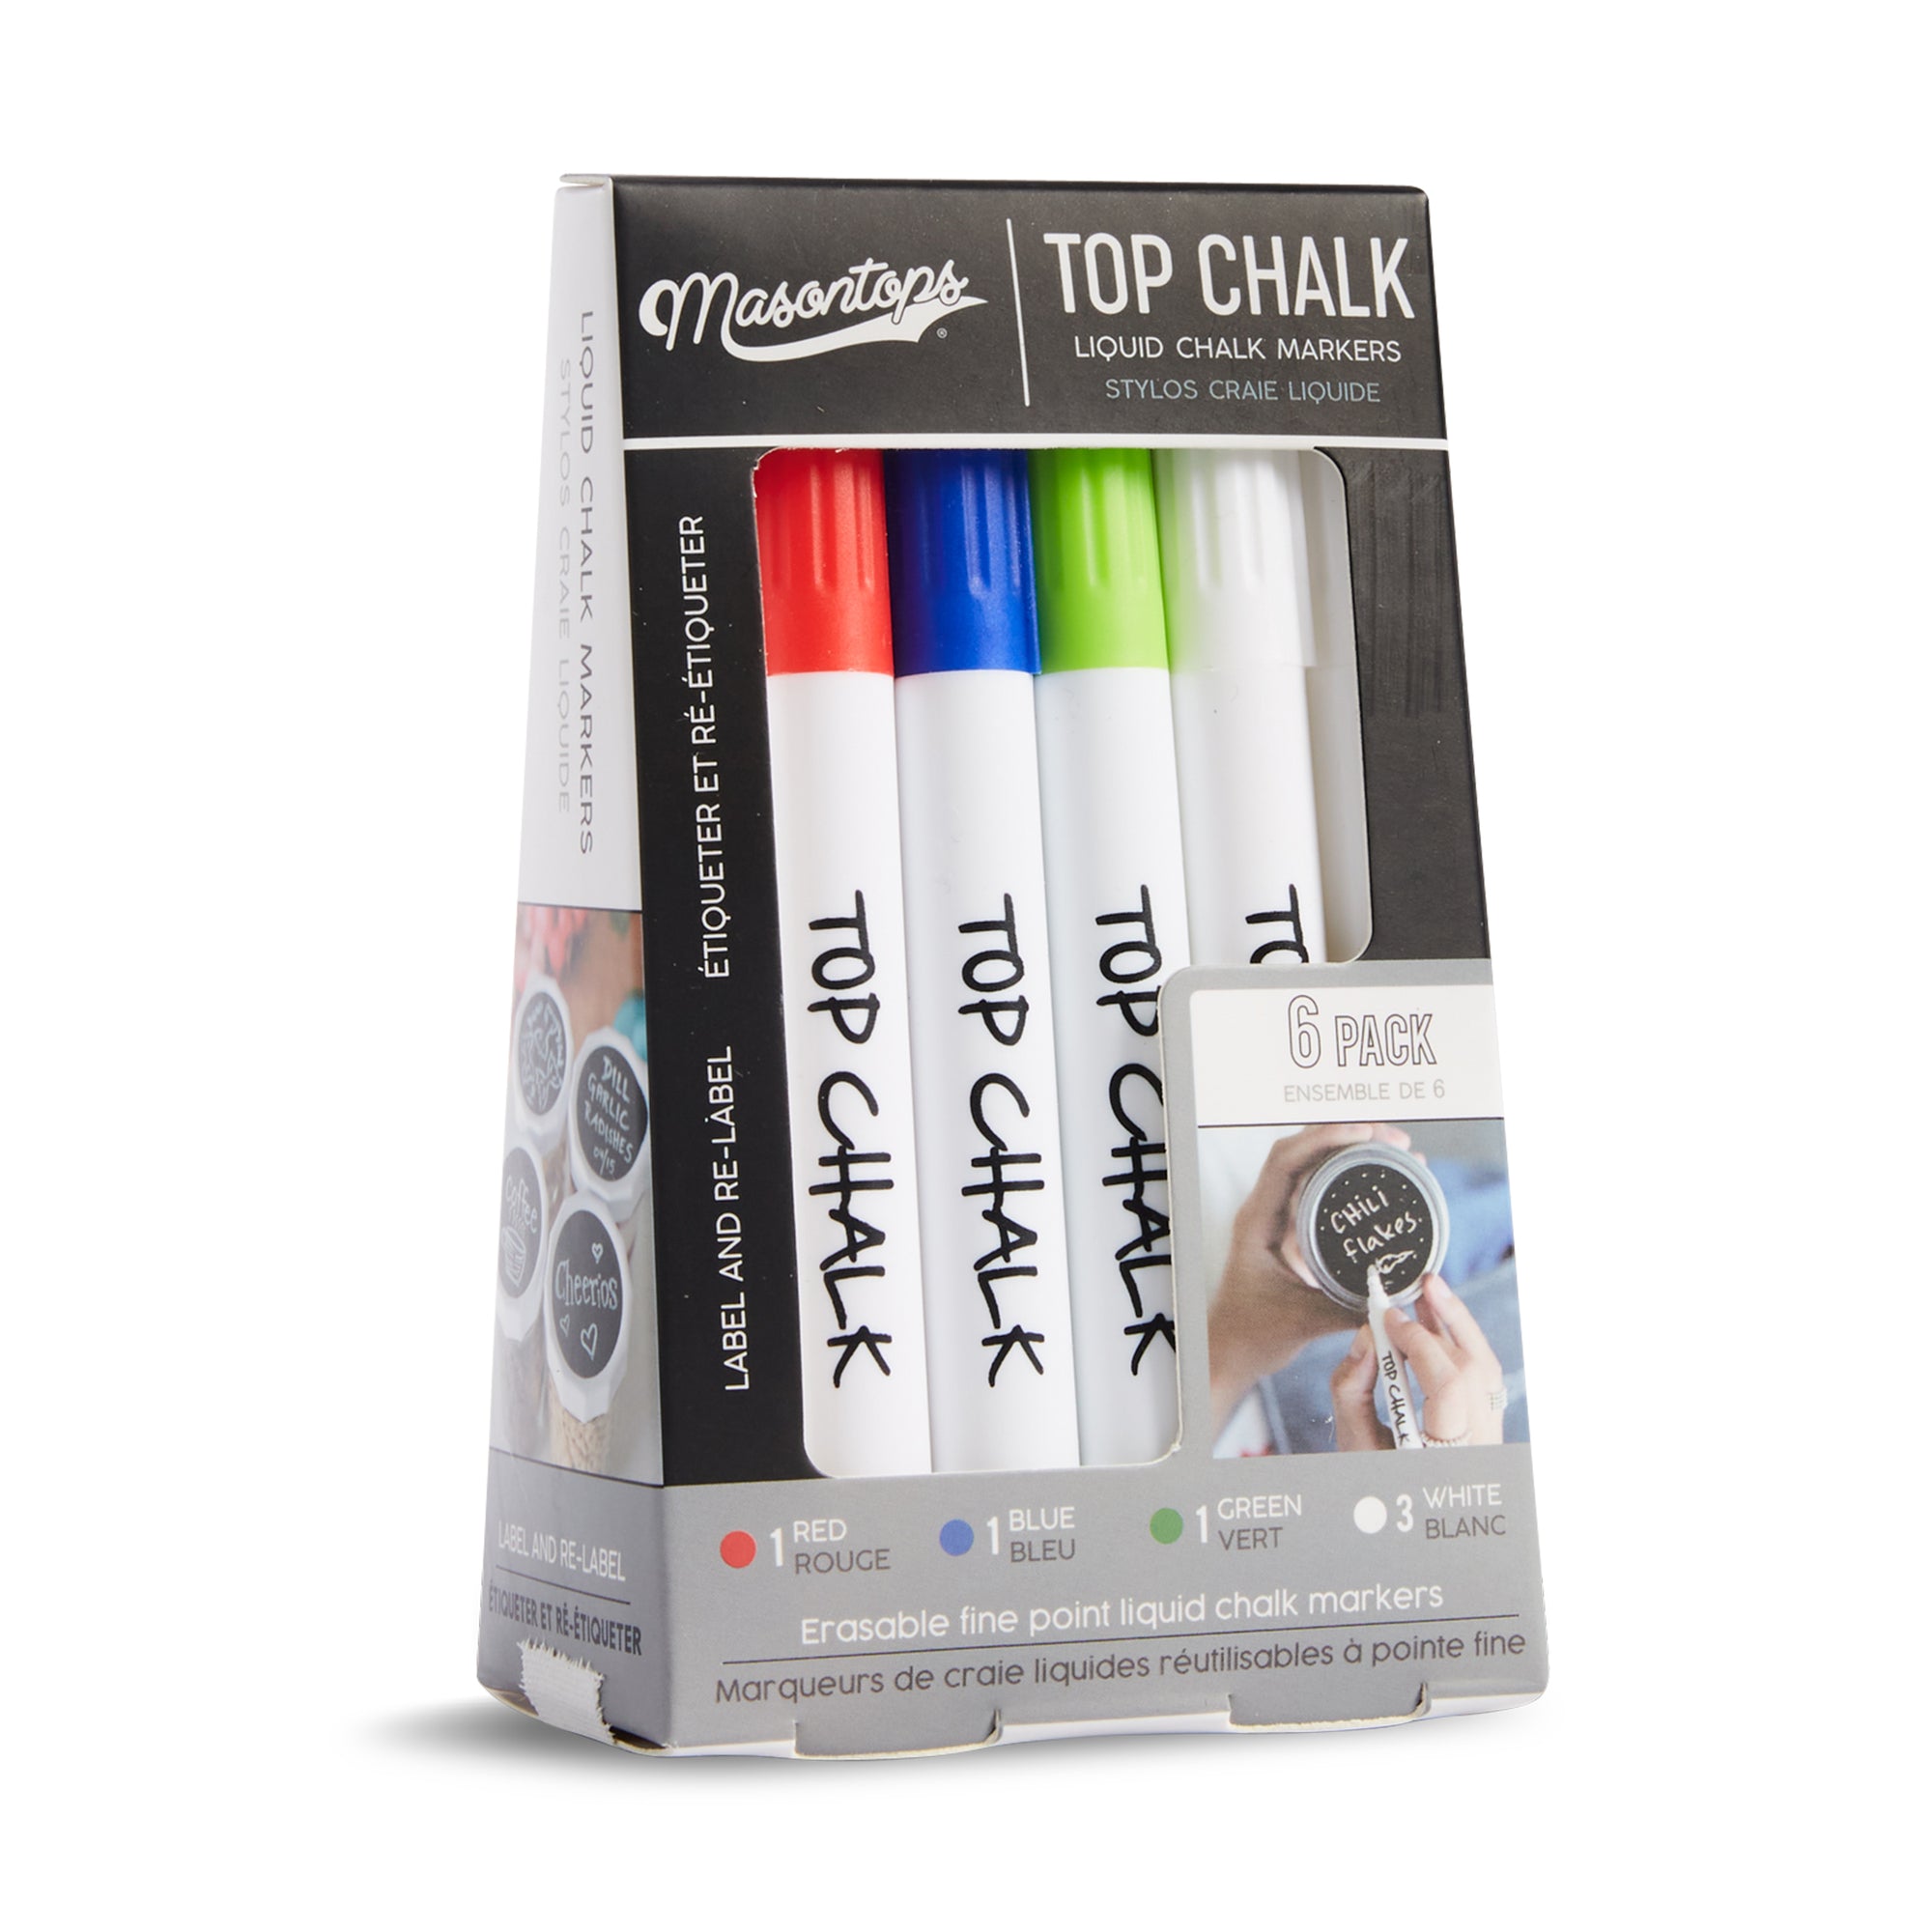 Ink Stop Ltd. - Liquid chalk markers now available!